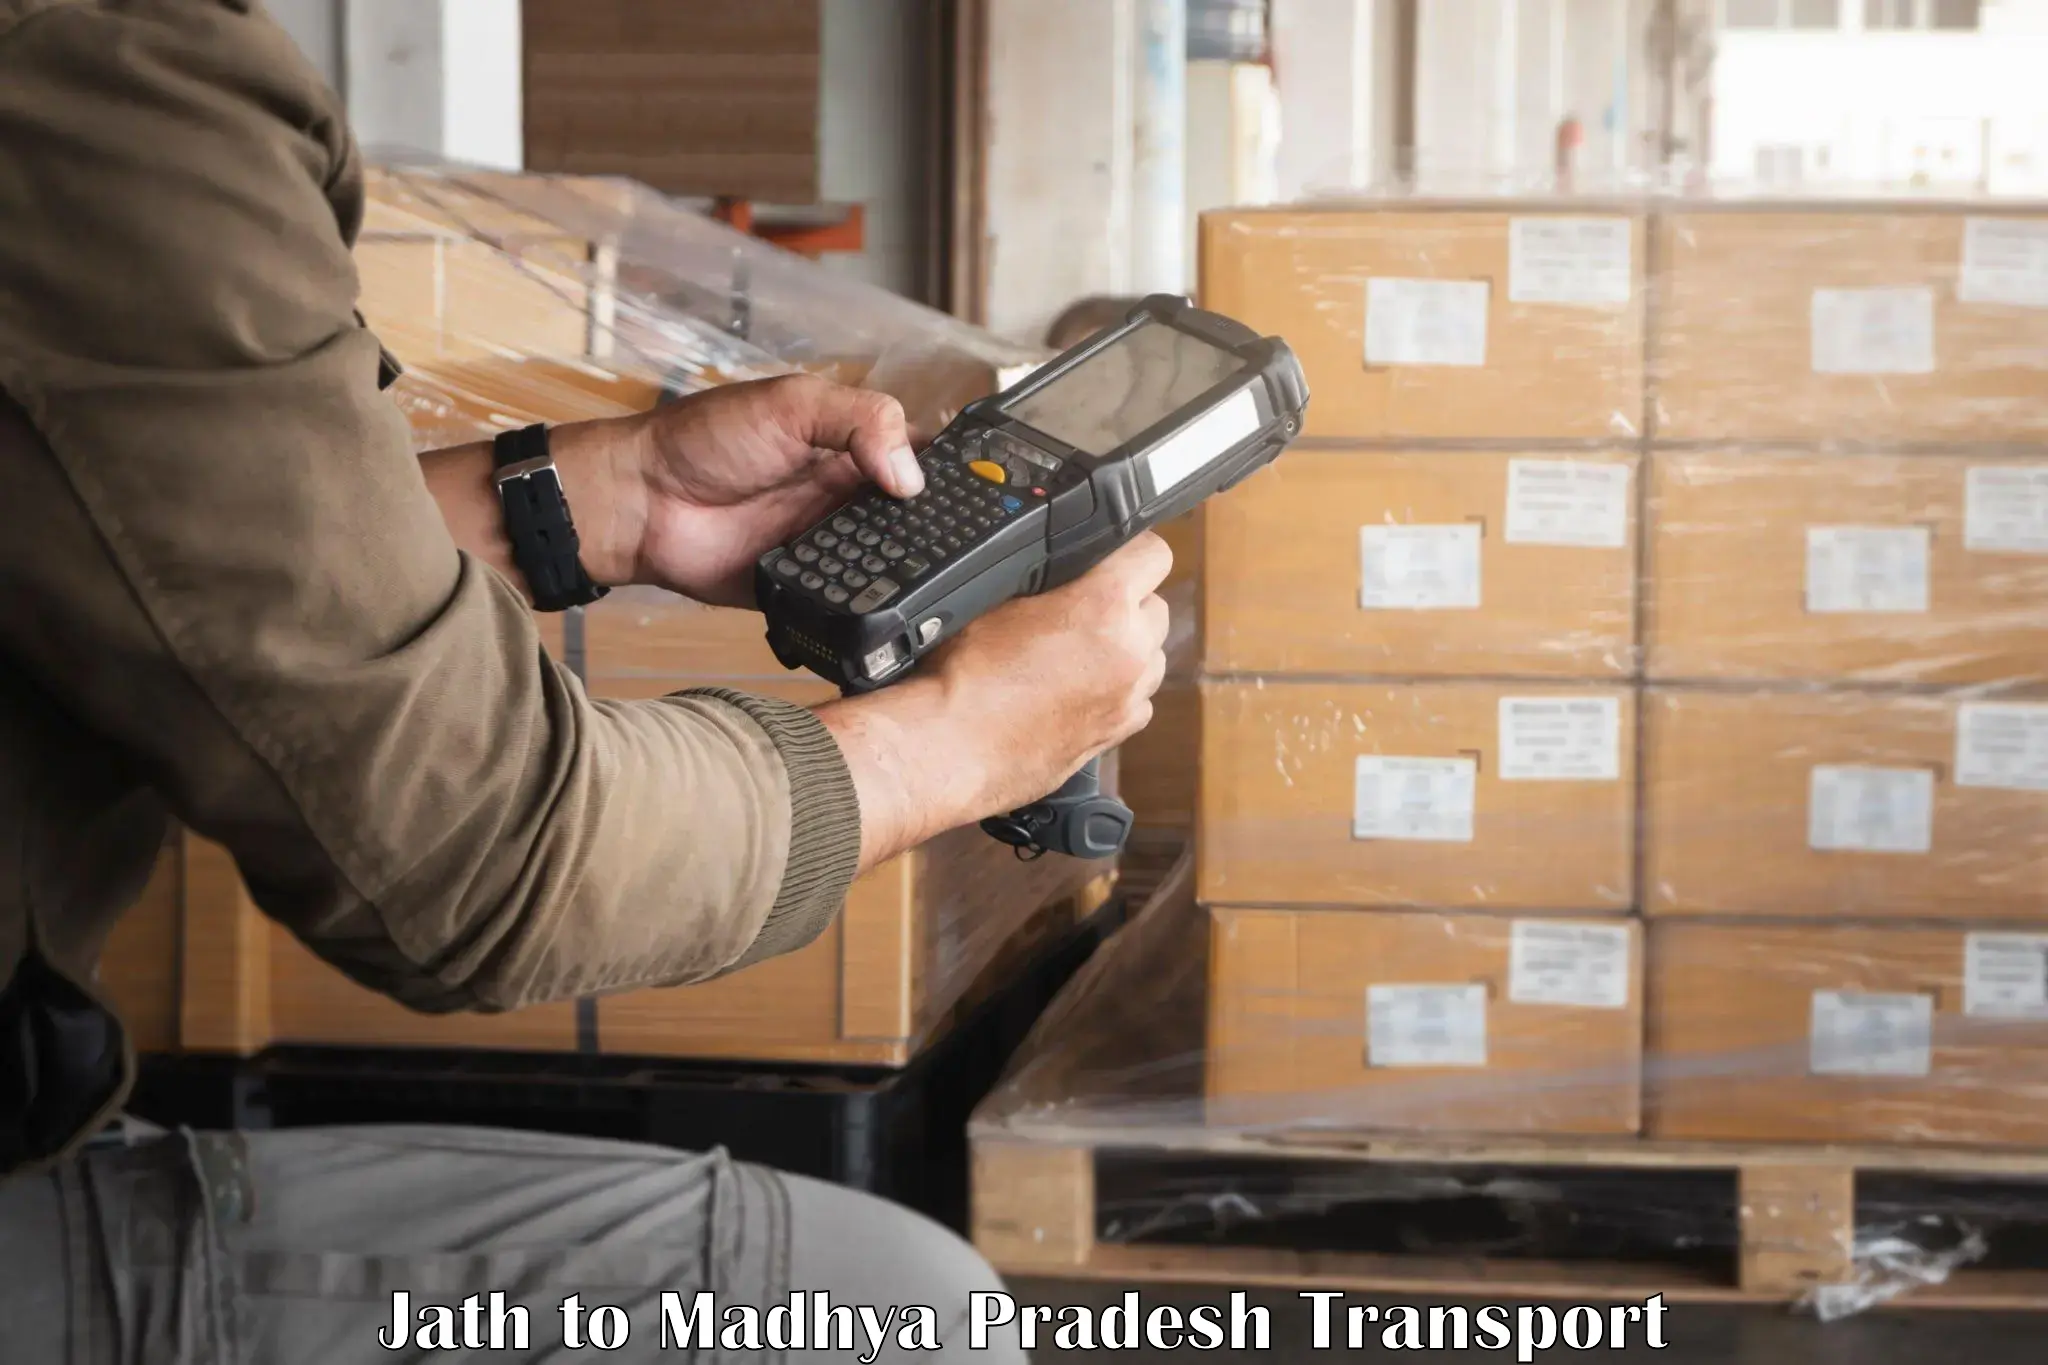 Container transport service Jath to IIT Indore